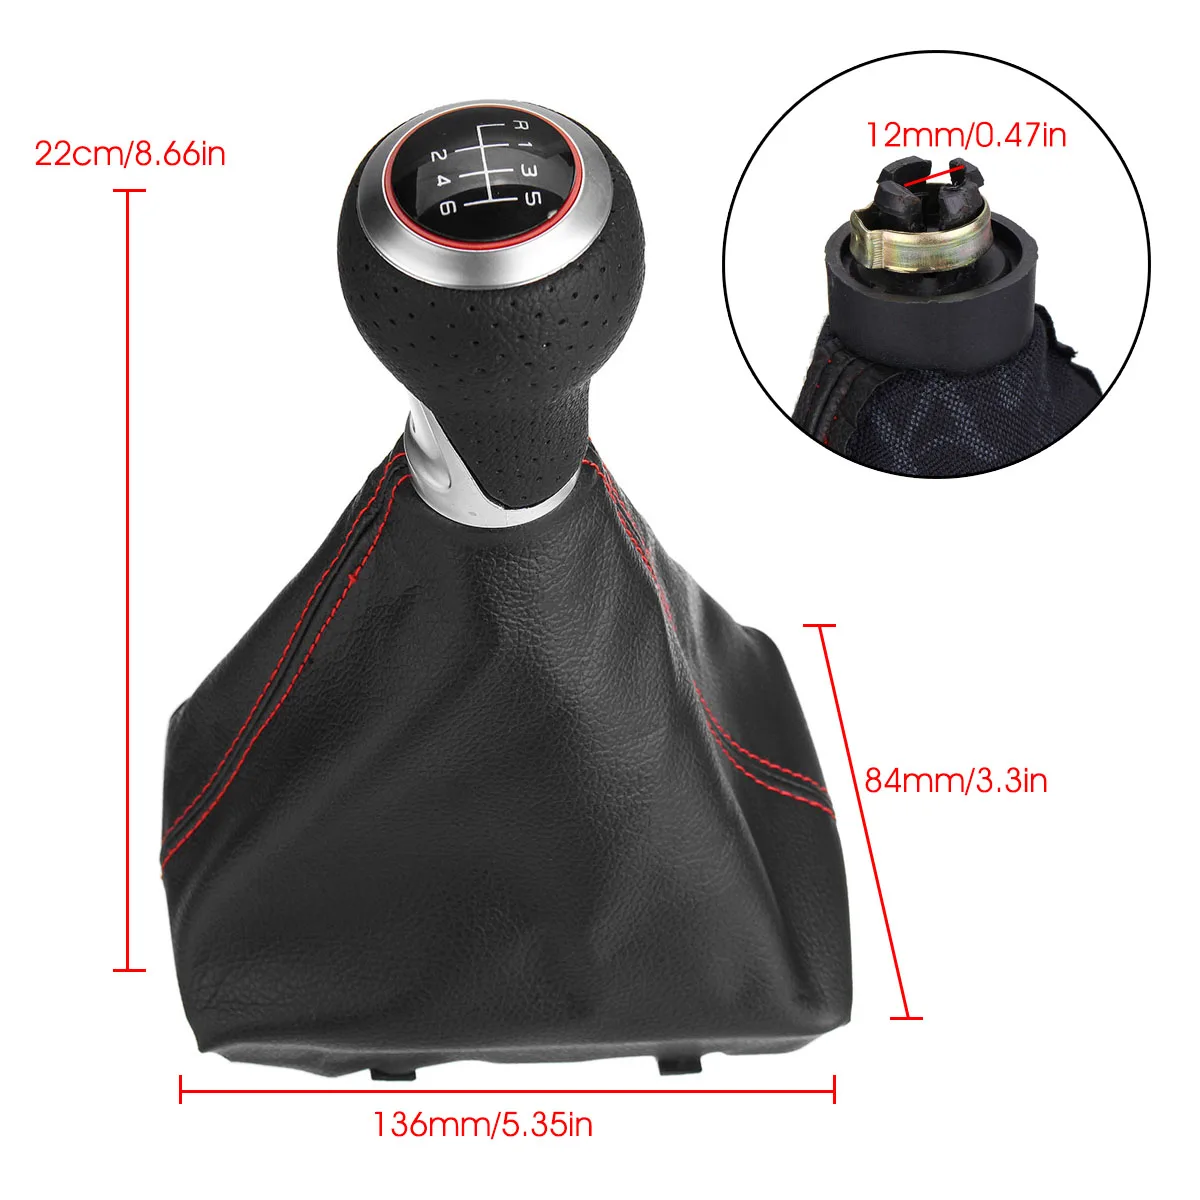 6 Speed Car Manual Gear Shift Knob PU Leather Gaiter Boot Cover For Audi A4 S4 8K A5 8T Q5 8R S-Line 2007